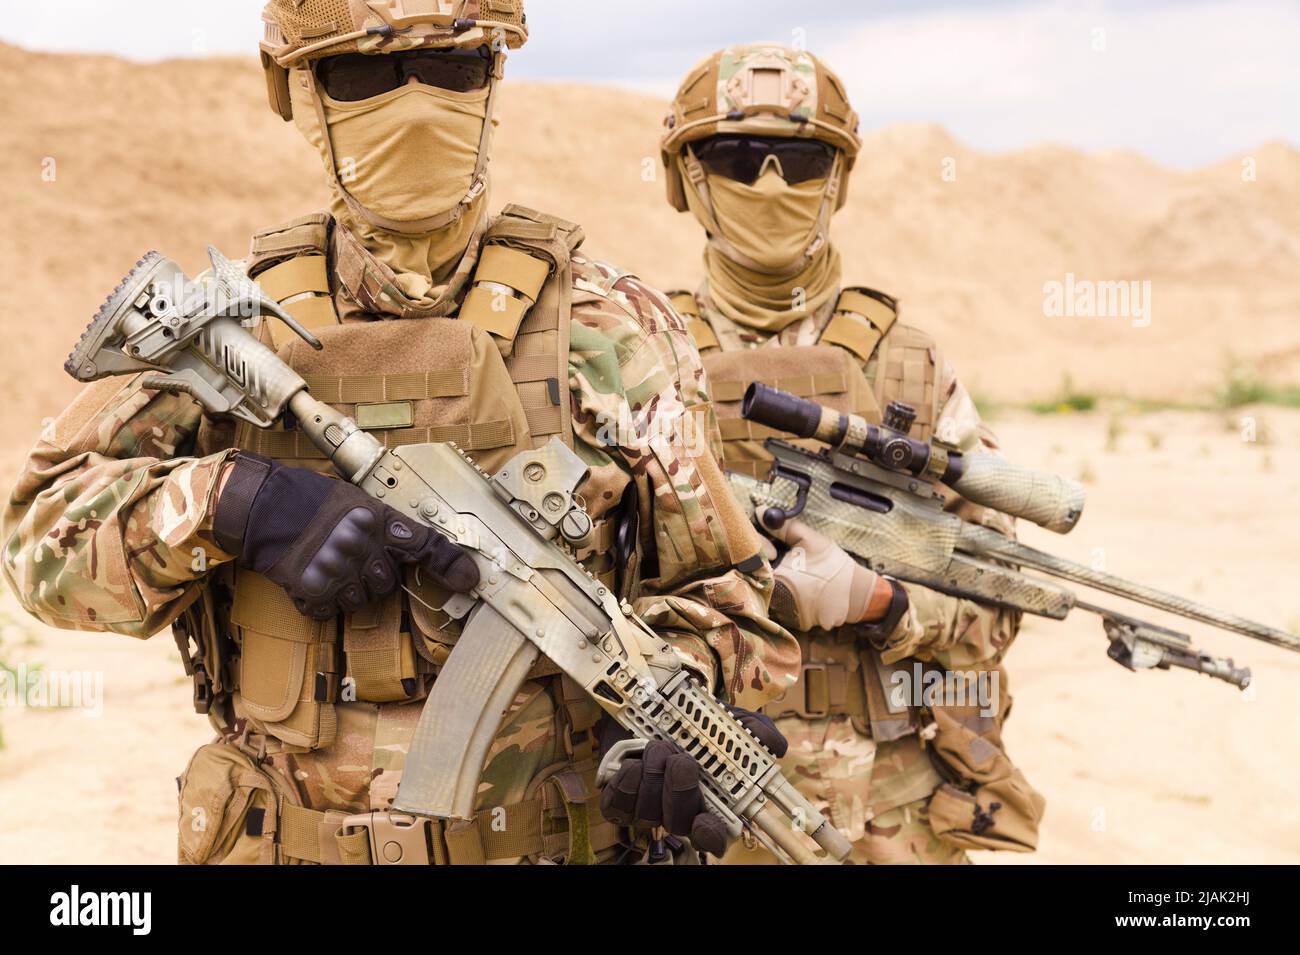 Close-up portrait of equipped and armed special forces soldiers with sniper rifles. Stock Photo